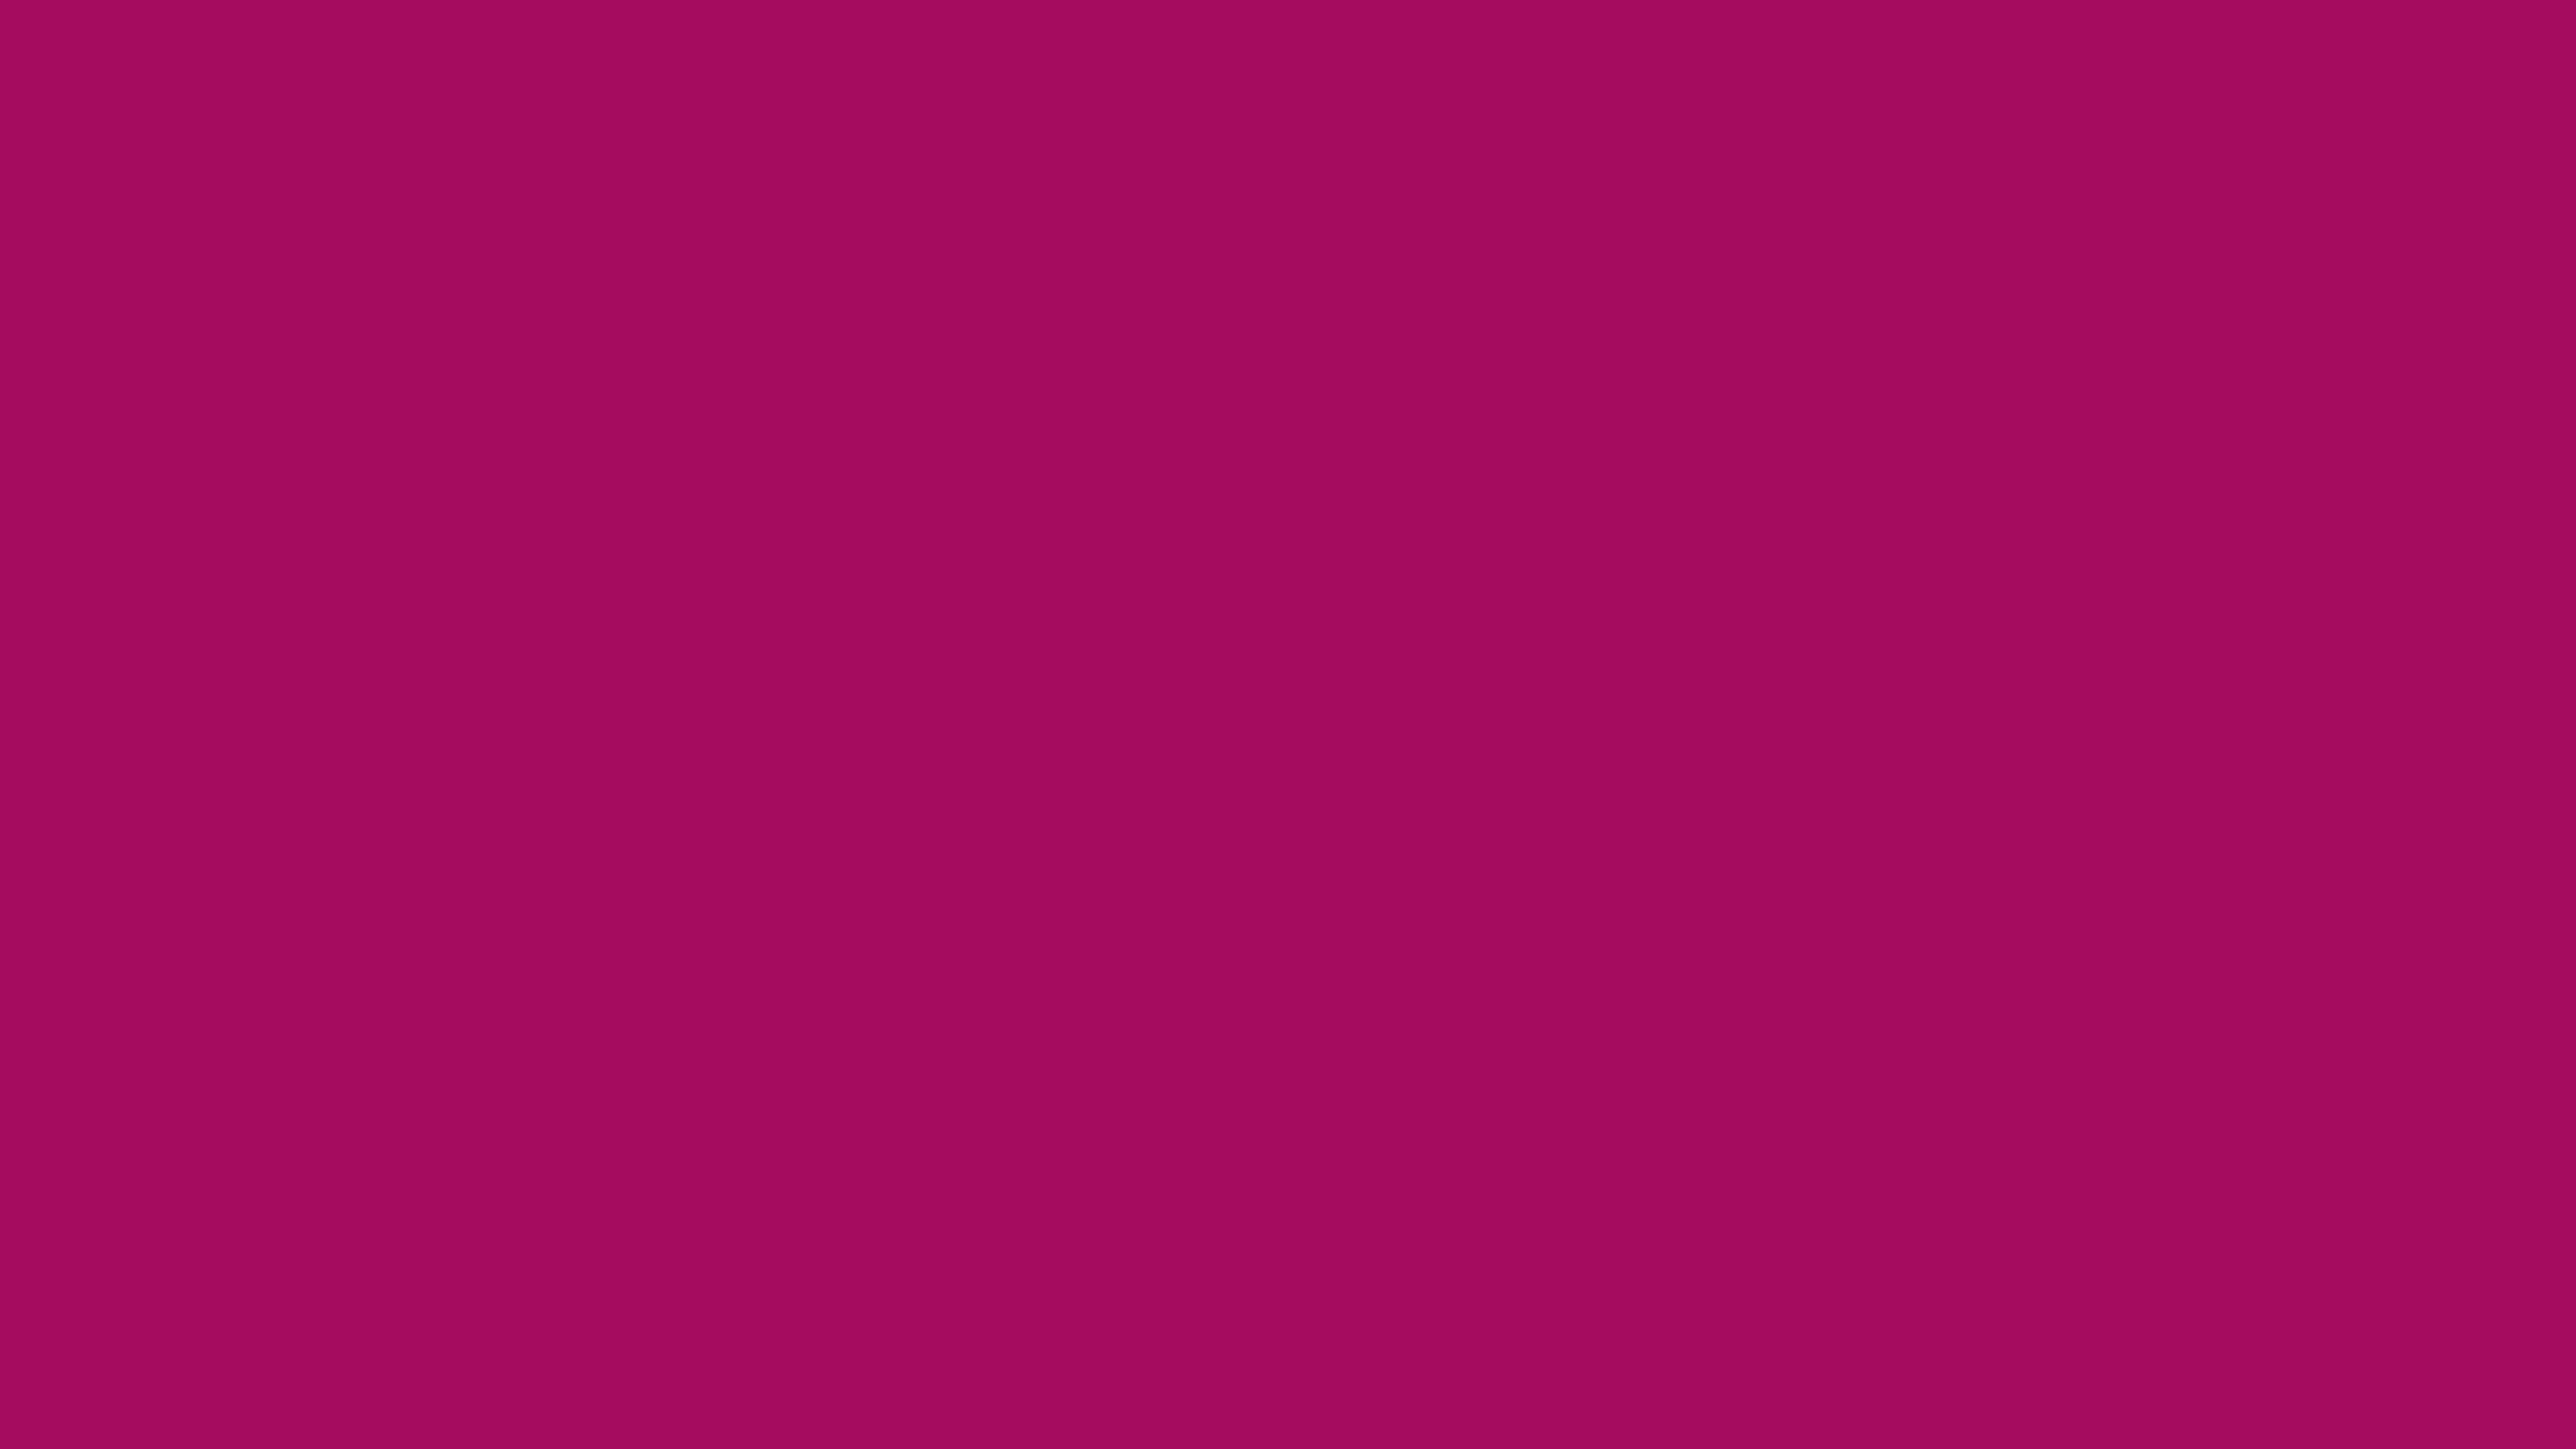 5120x2880 Jazzberry Jam Solid Color Background